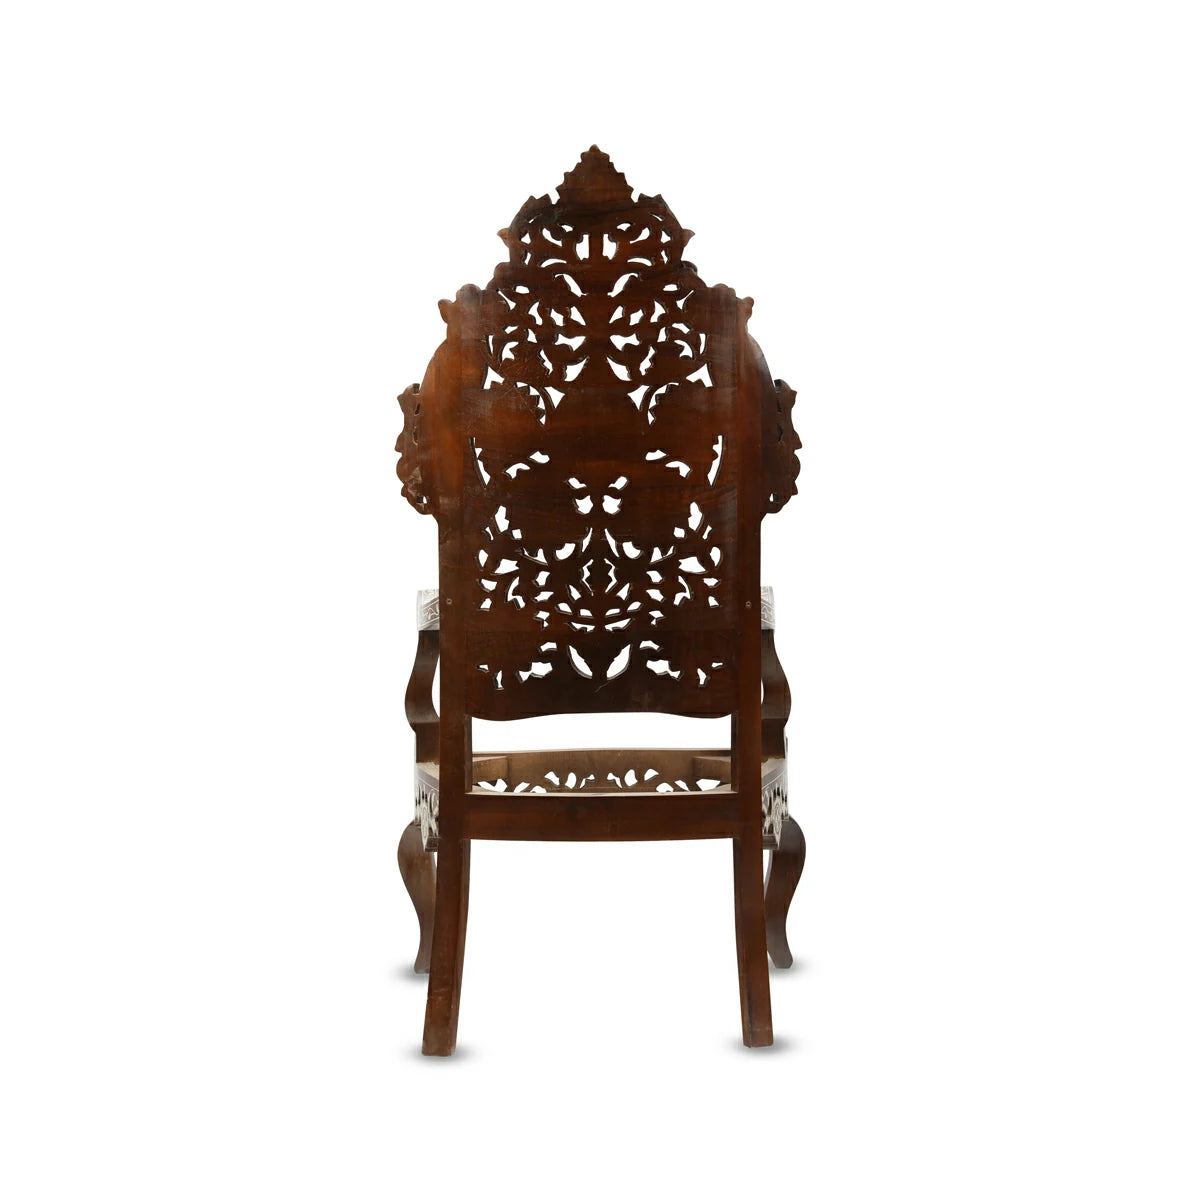 Back View of Mother of Pearl Inlaid Designer Chair